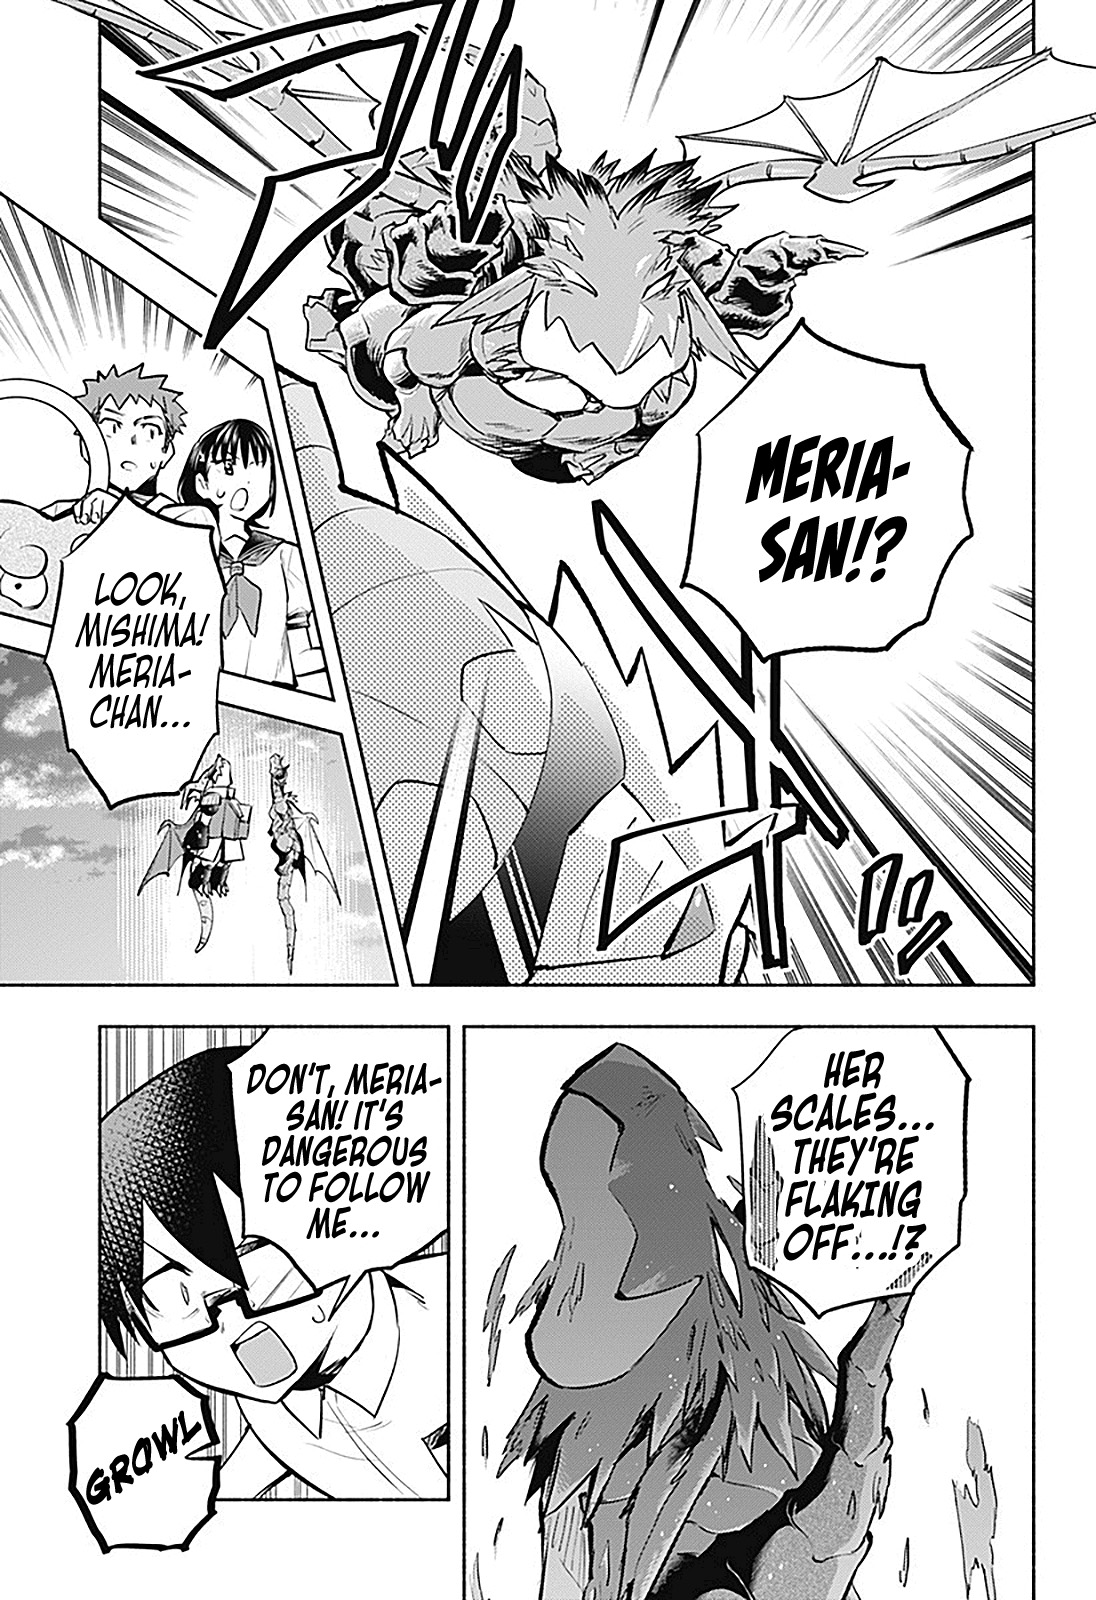 That Dragon (Exchange) Student Stands Out More Than Me - Page 4